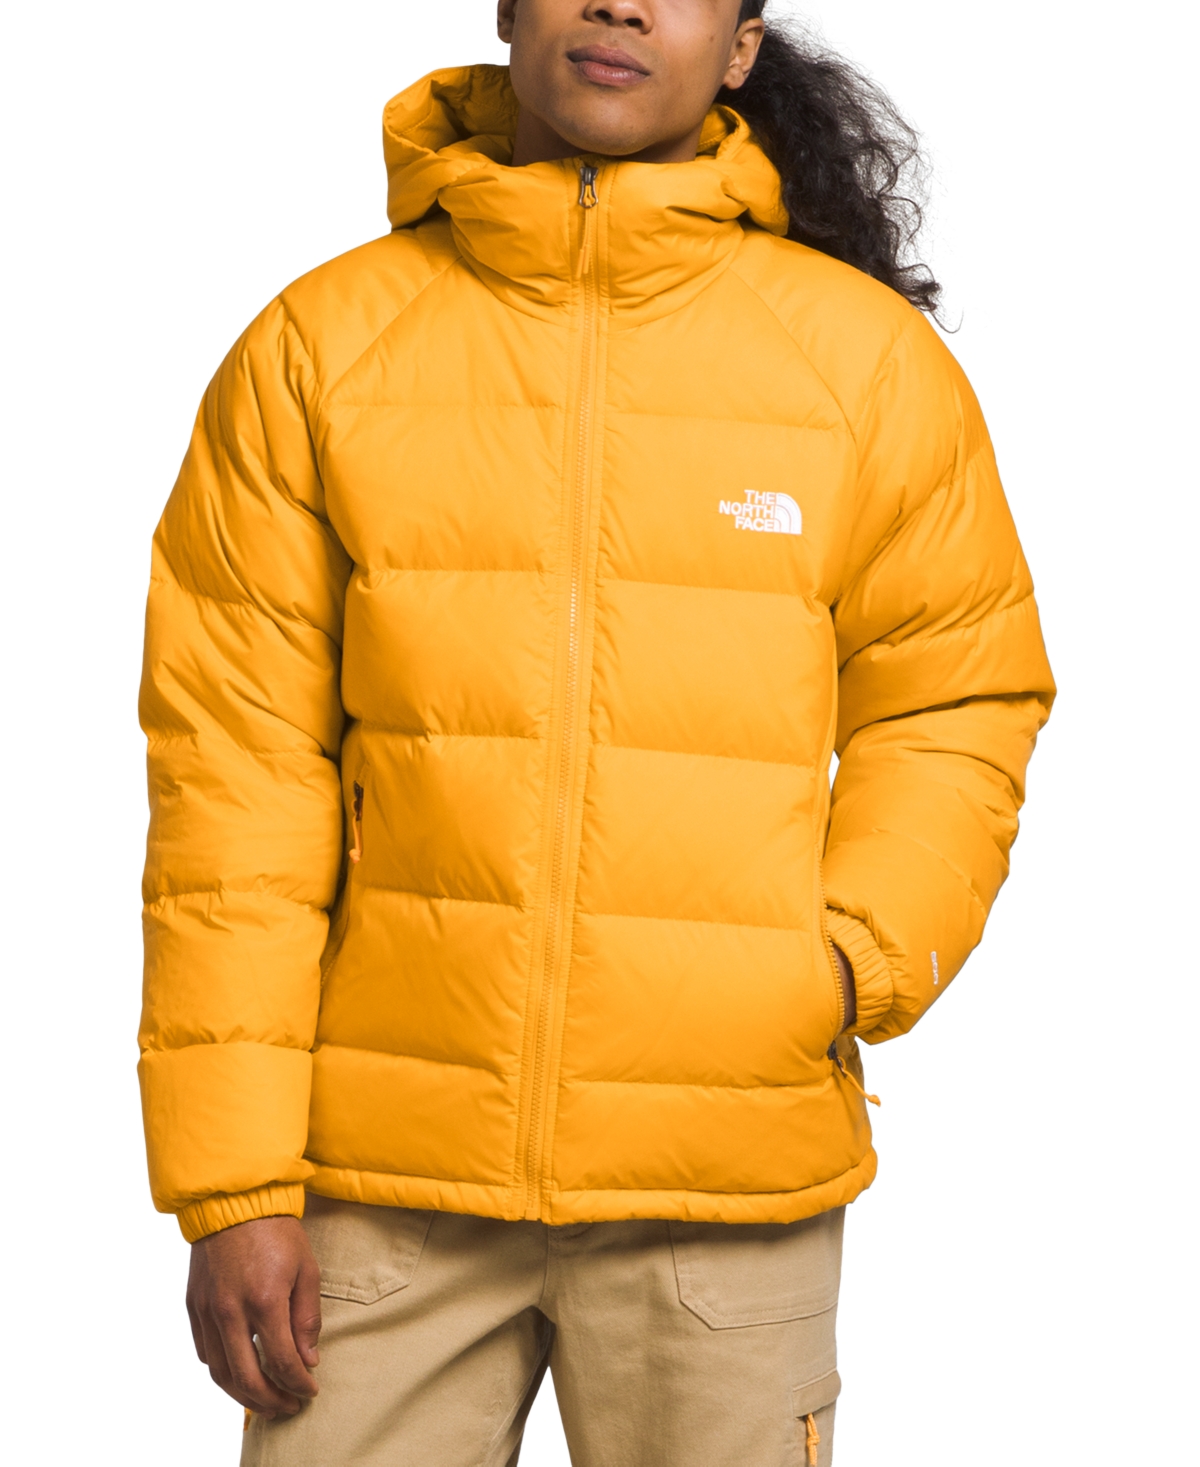 THE NORTH FACE MEN'S HYDRENALITE DOWN HOODIE